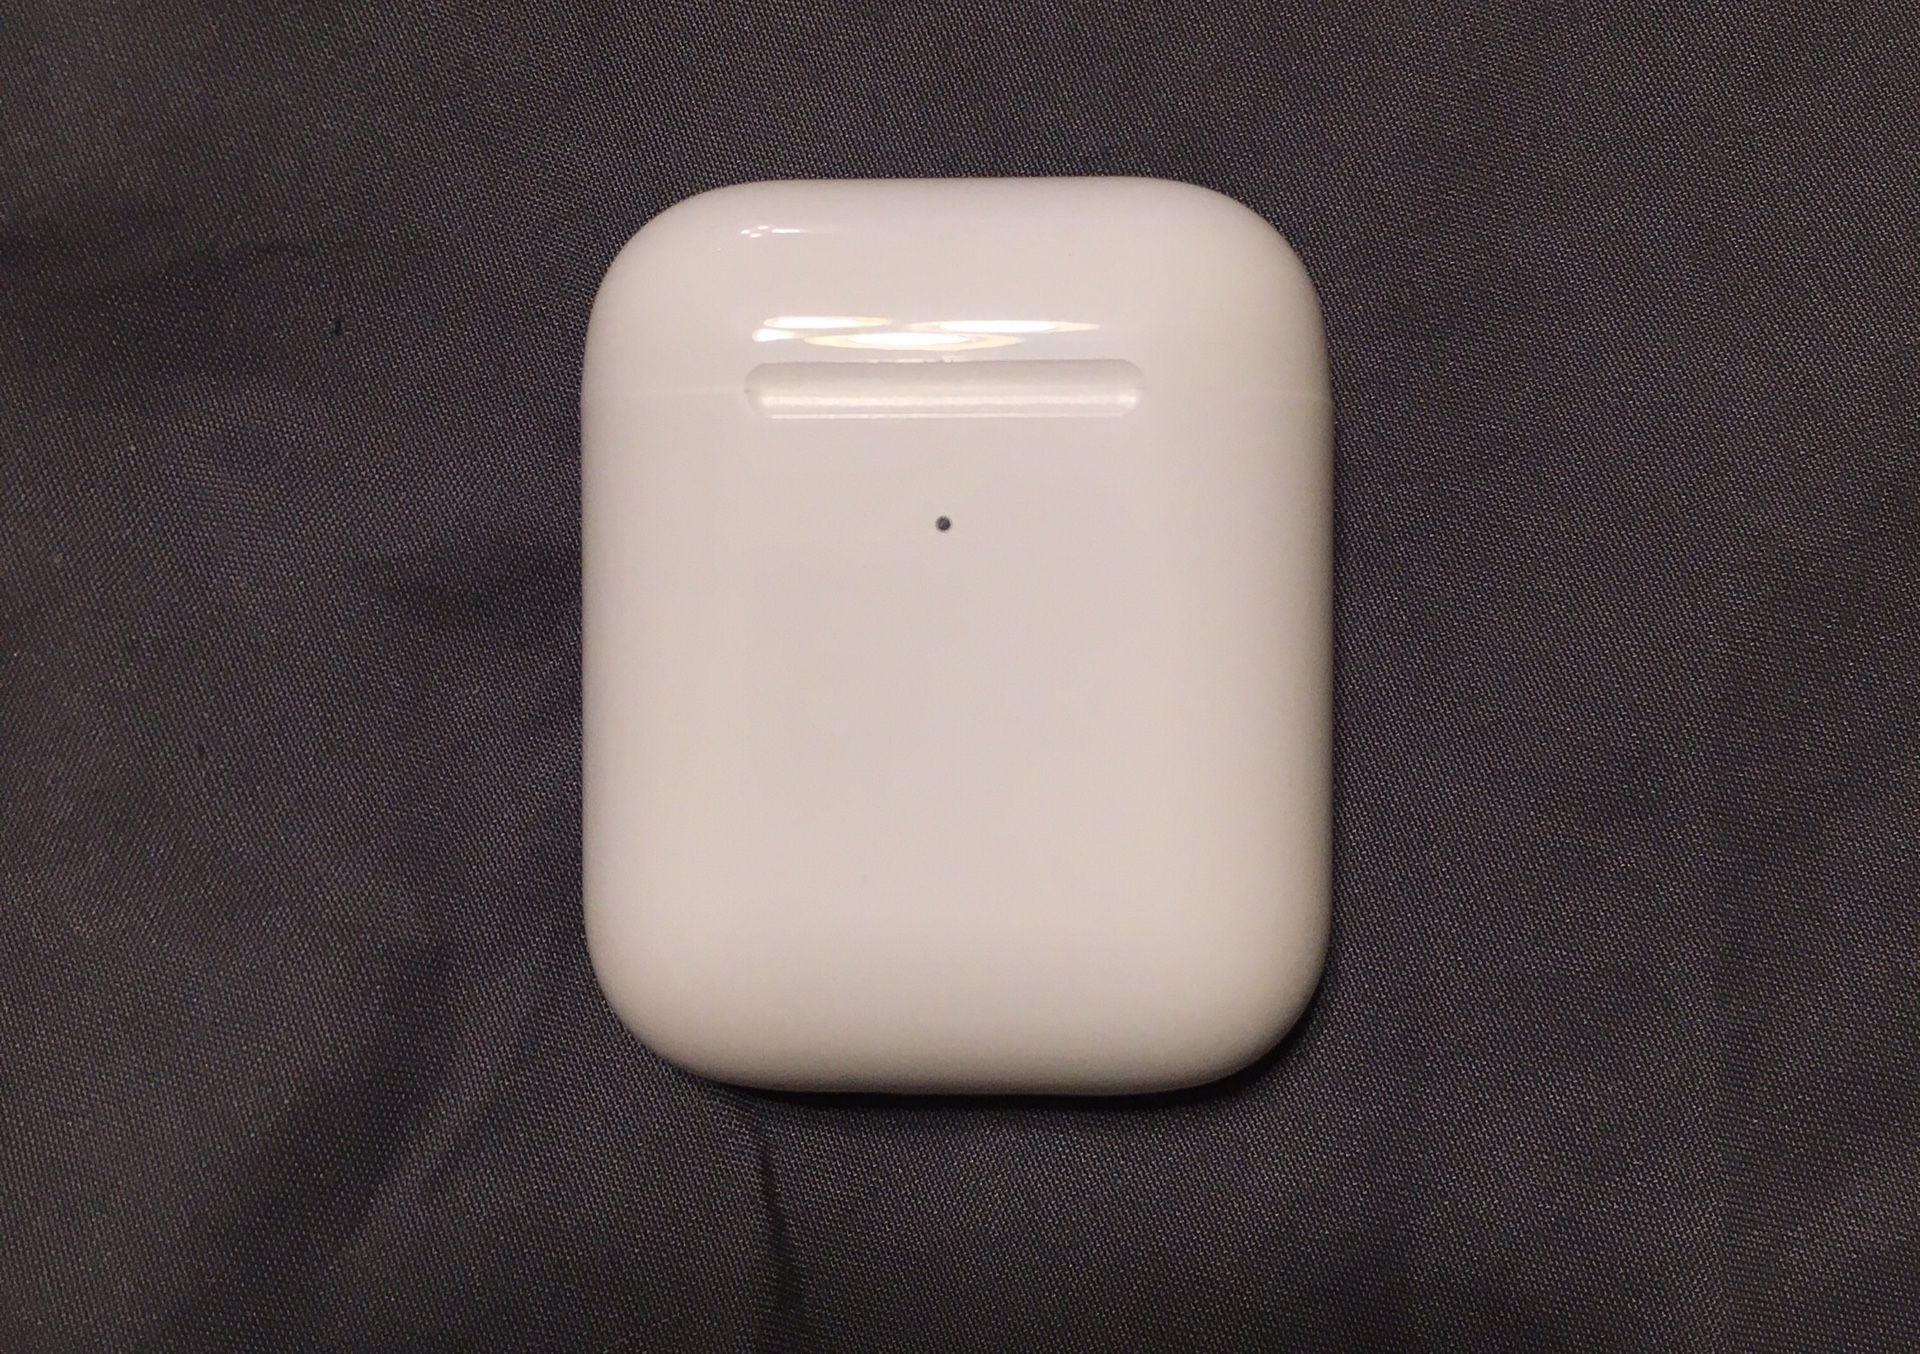 Unboxed-Like Brand New AirPods 2nd Generation